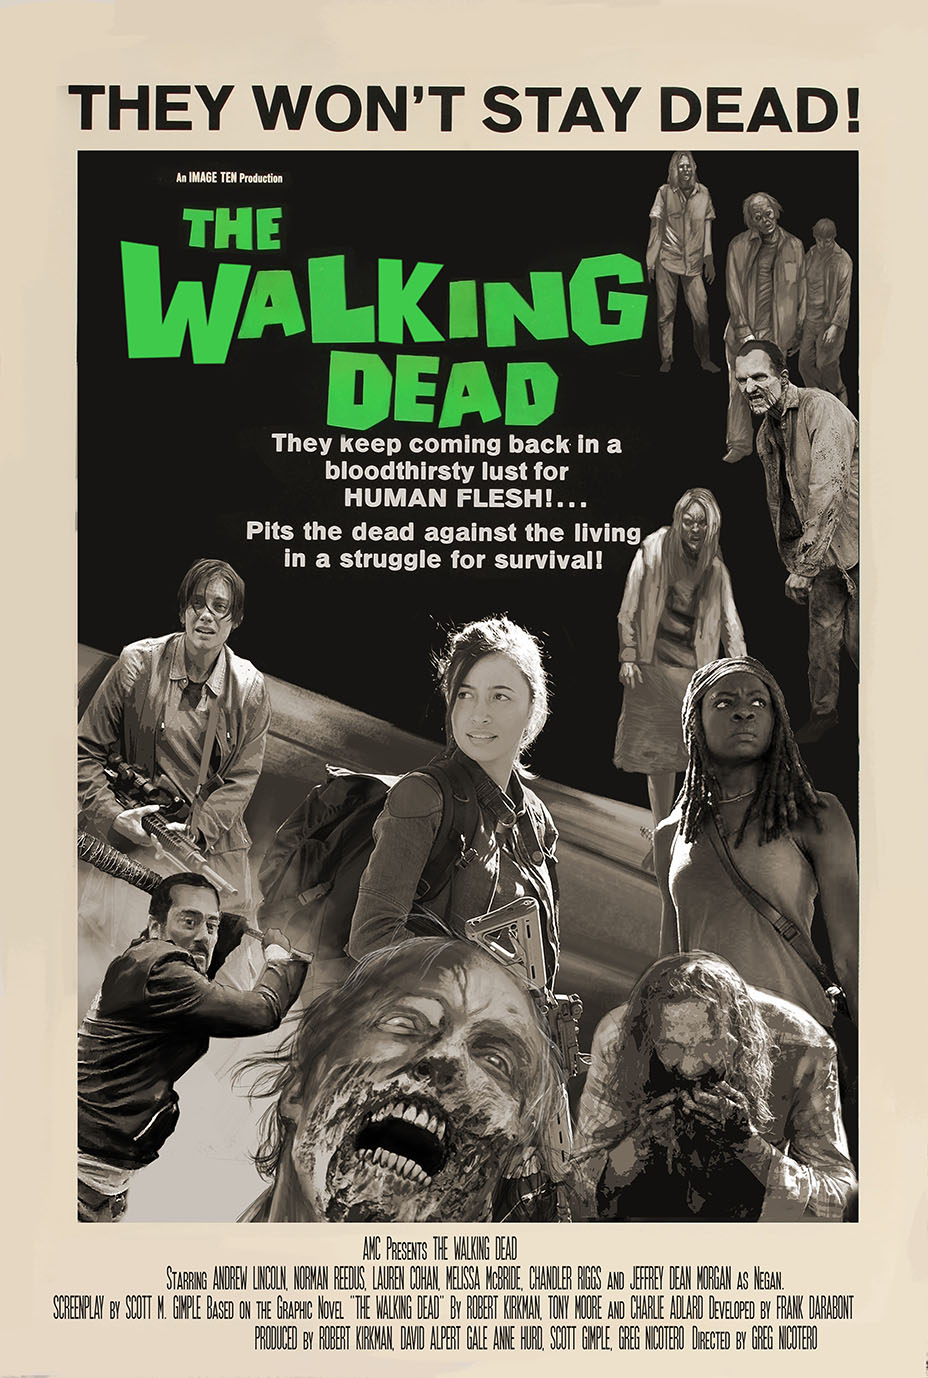 The Walking Dead Takes Over Some Of The Most Famous Movie Posters Ever